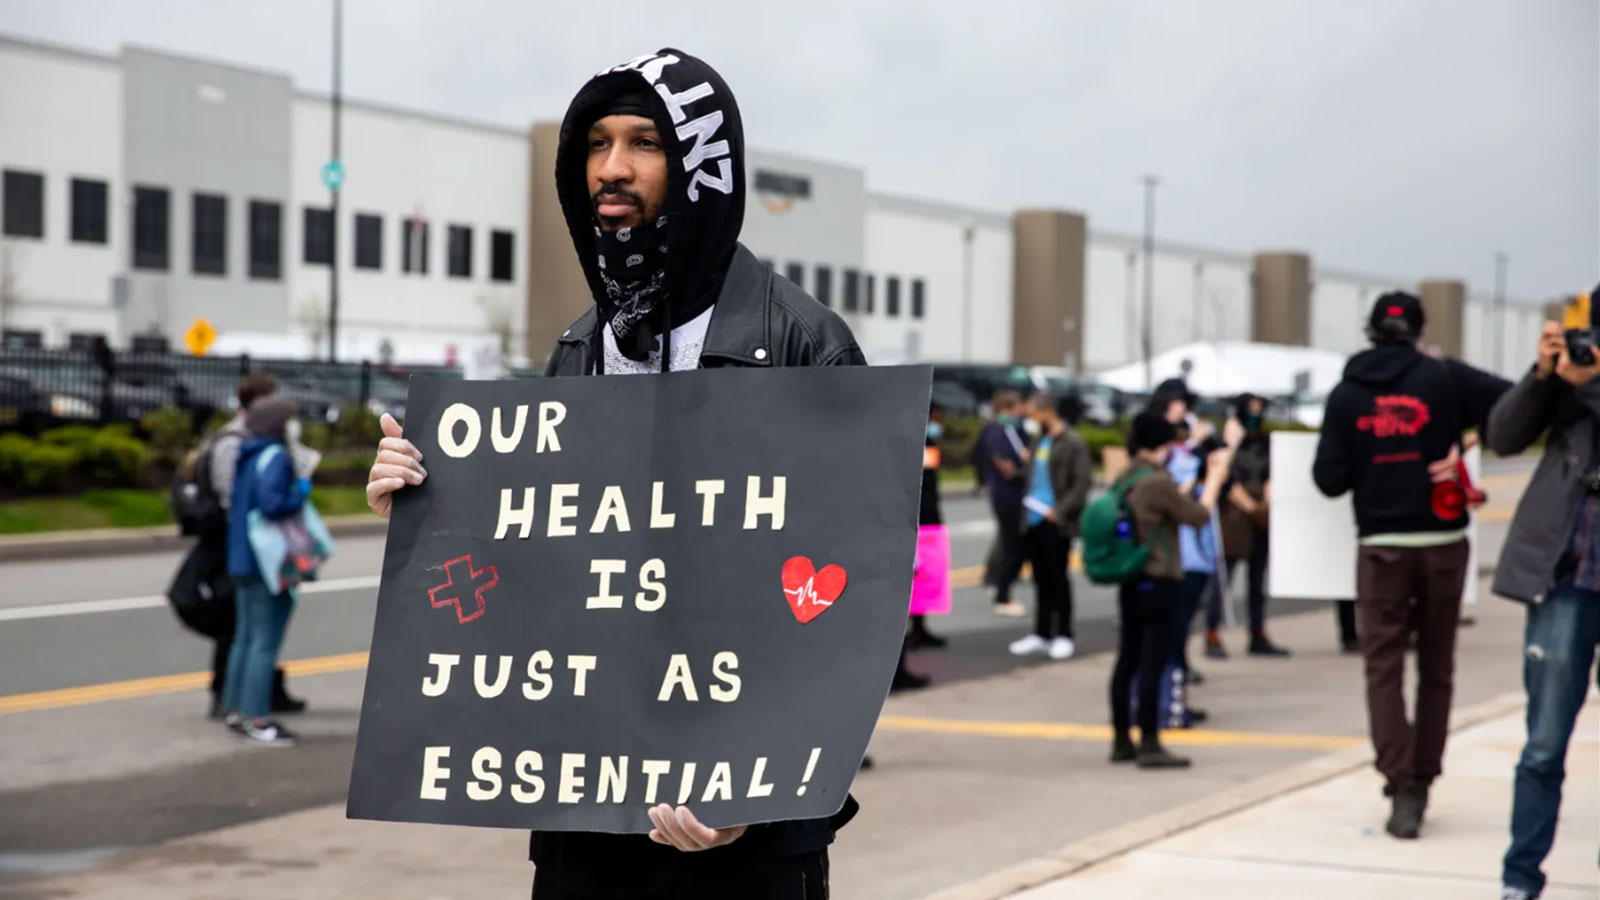 Chris Smalls holds a sign during a protest outside an Amazon facility on Staten Island on May 1, 2020, after he was fired by the company.